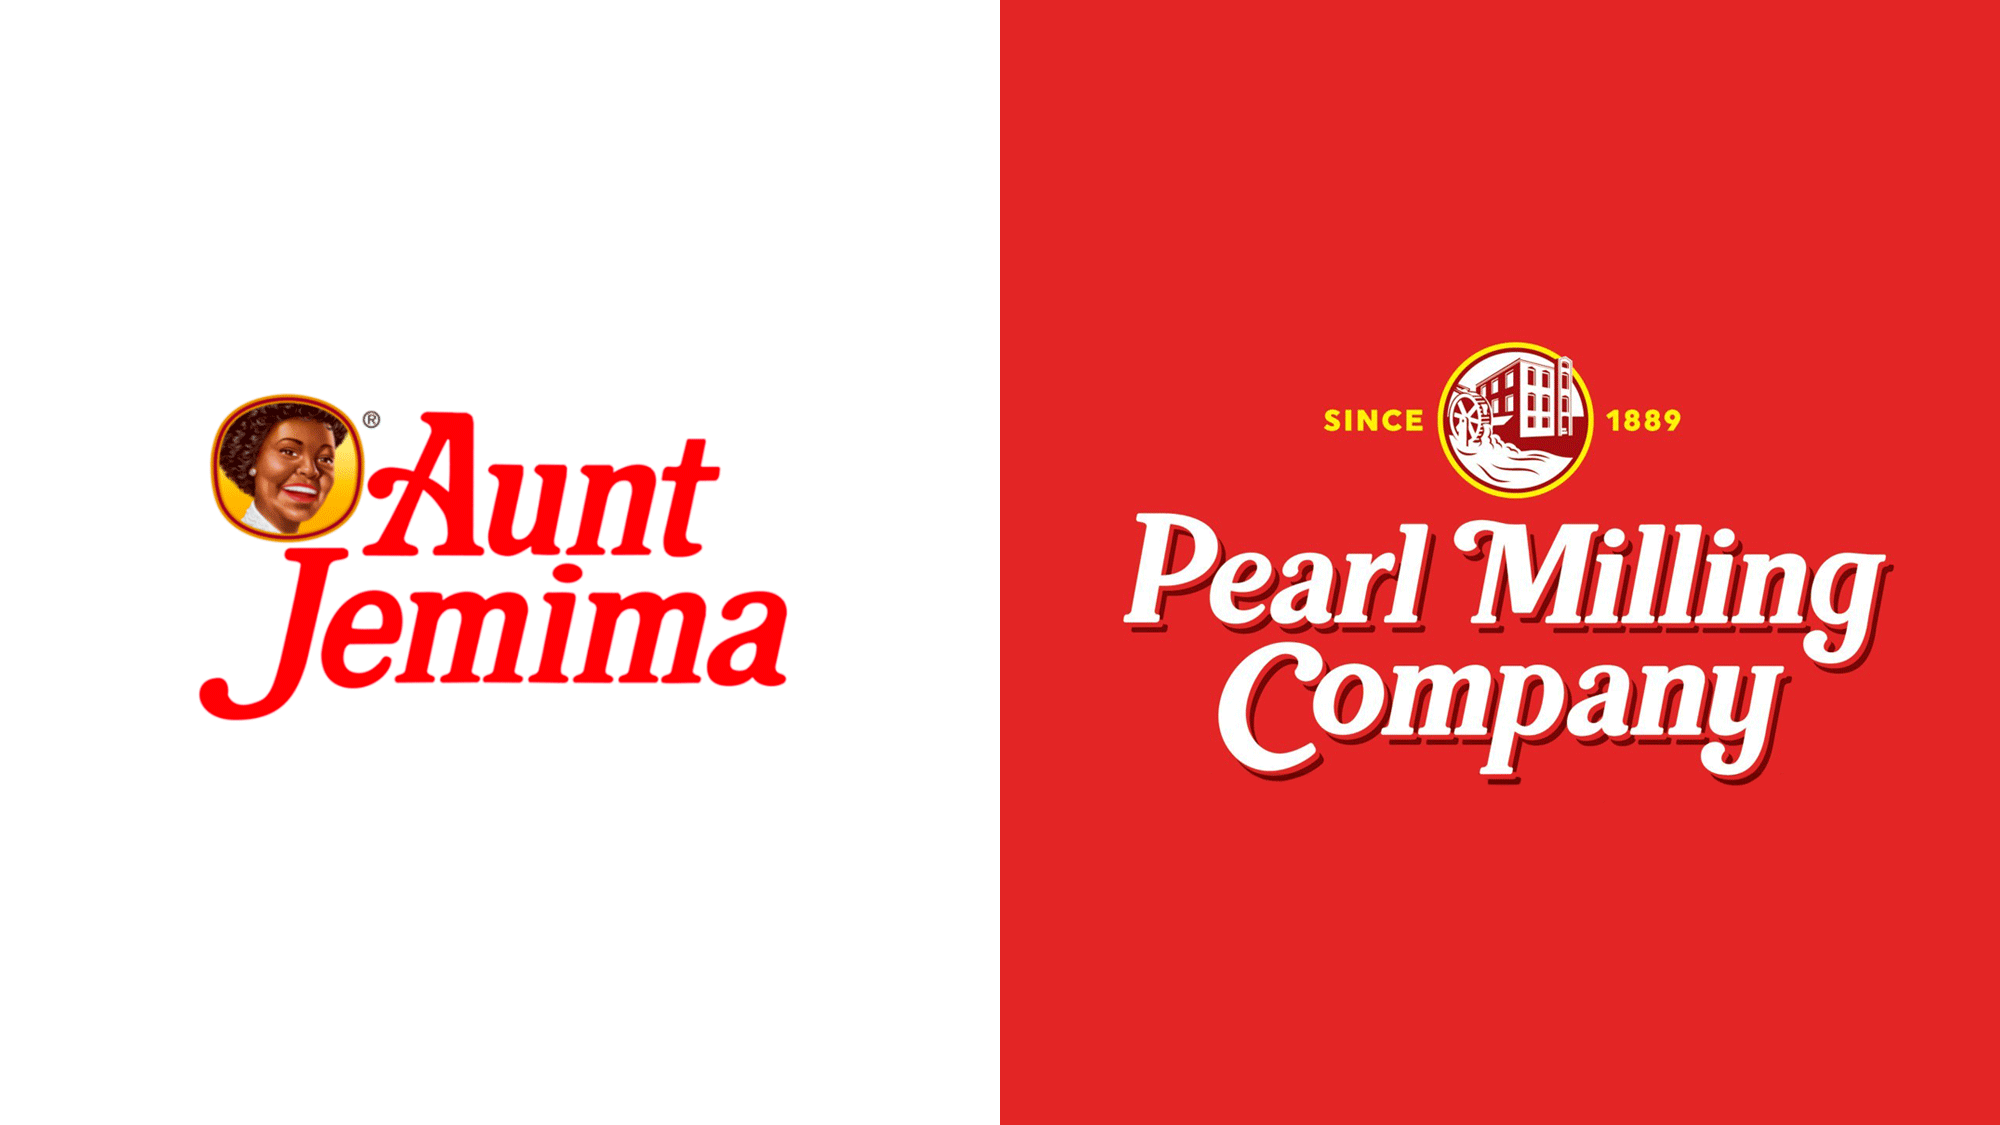 New Name and Logo for Pearl Milling Company